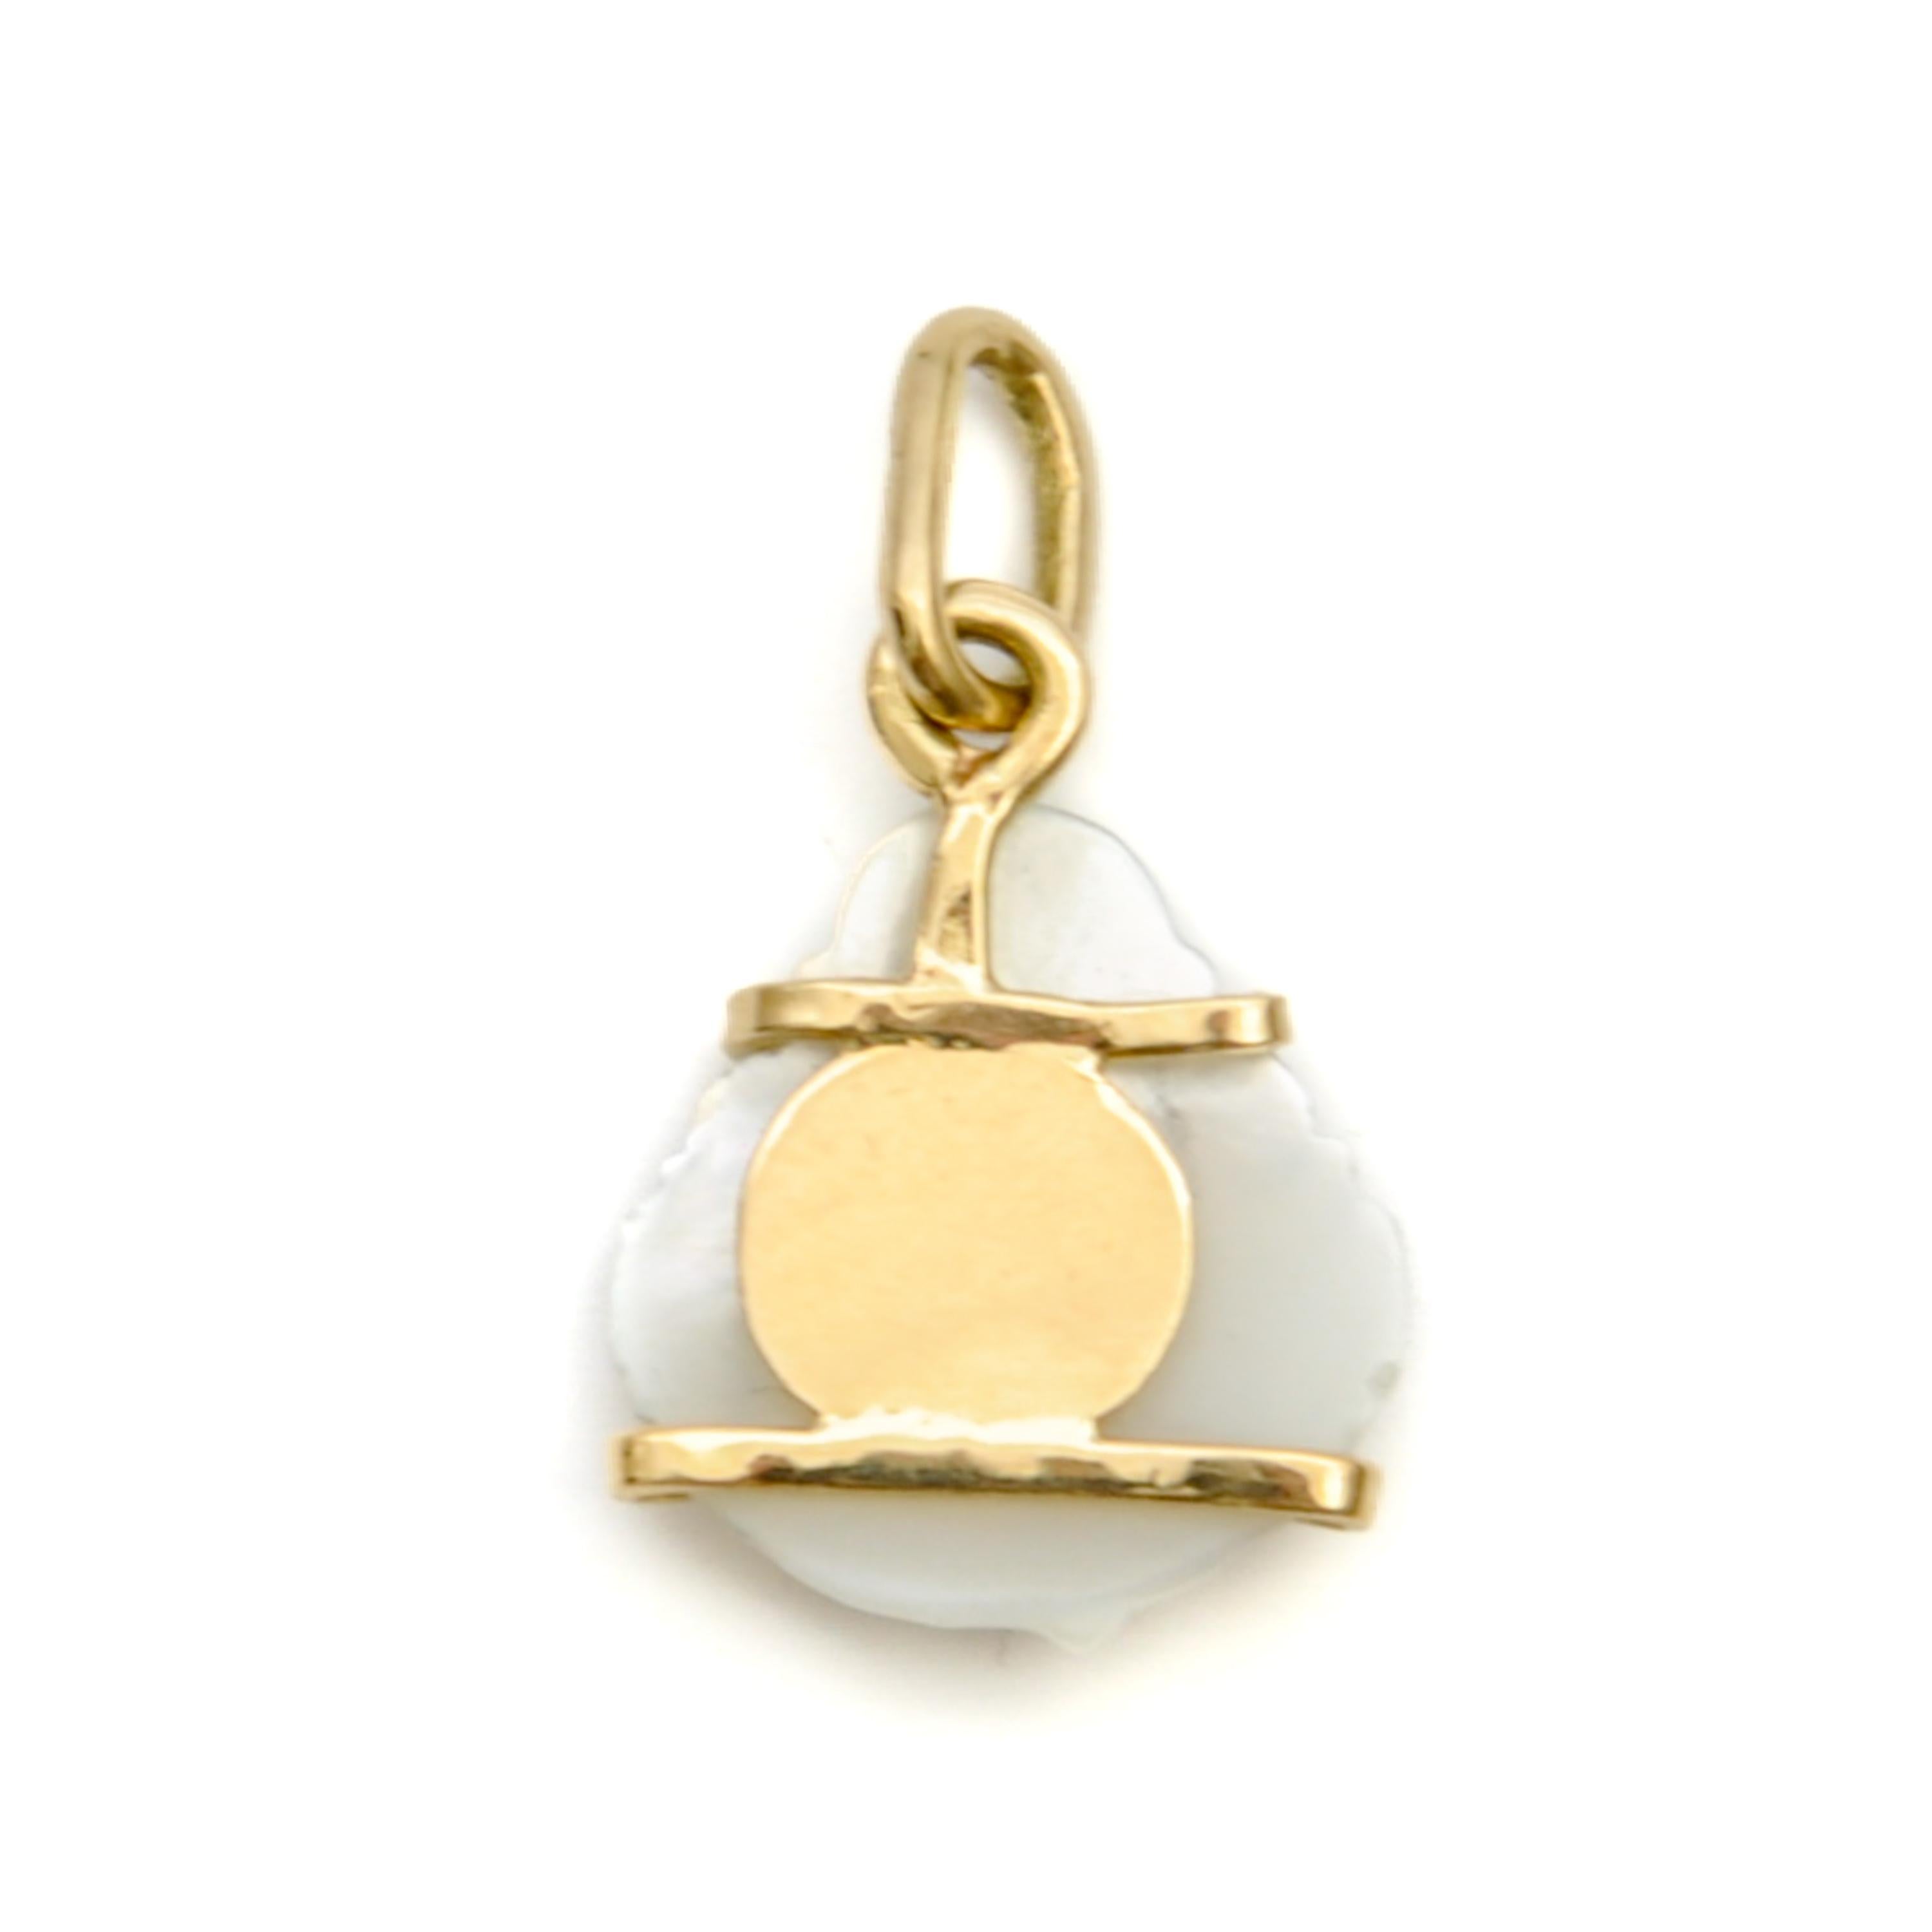 Vintage 14K Gold Mother of Pearl Buddha Charm Pendant For Sale 1